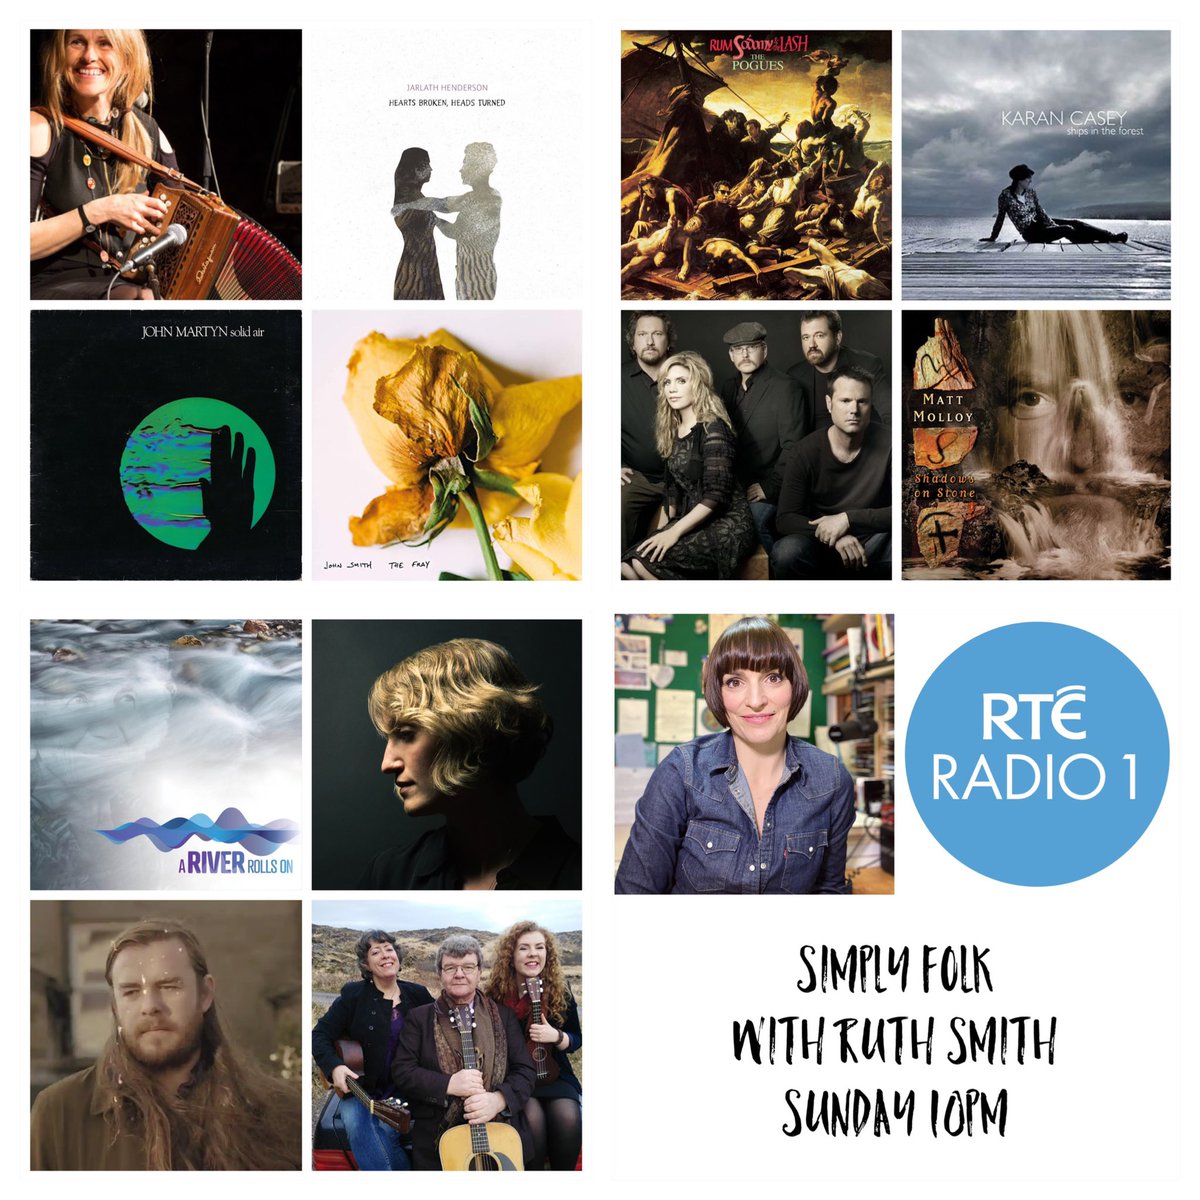 Sunday’s #SimplyFolk mix has classics from @poguesofficial John Martyn & Liam Clancy with new music from @greenshinemusic & @JFFdublin & more @CaseyKarancasey @SharonShannon99 @thejohnsmith @AlisonKrauss @JarlathHendersn @mikehanrahan58 @JoanShelley 
Tune in from 10pm @RTERadio1